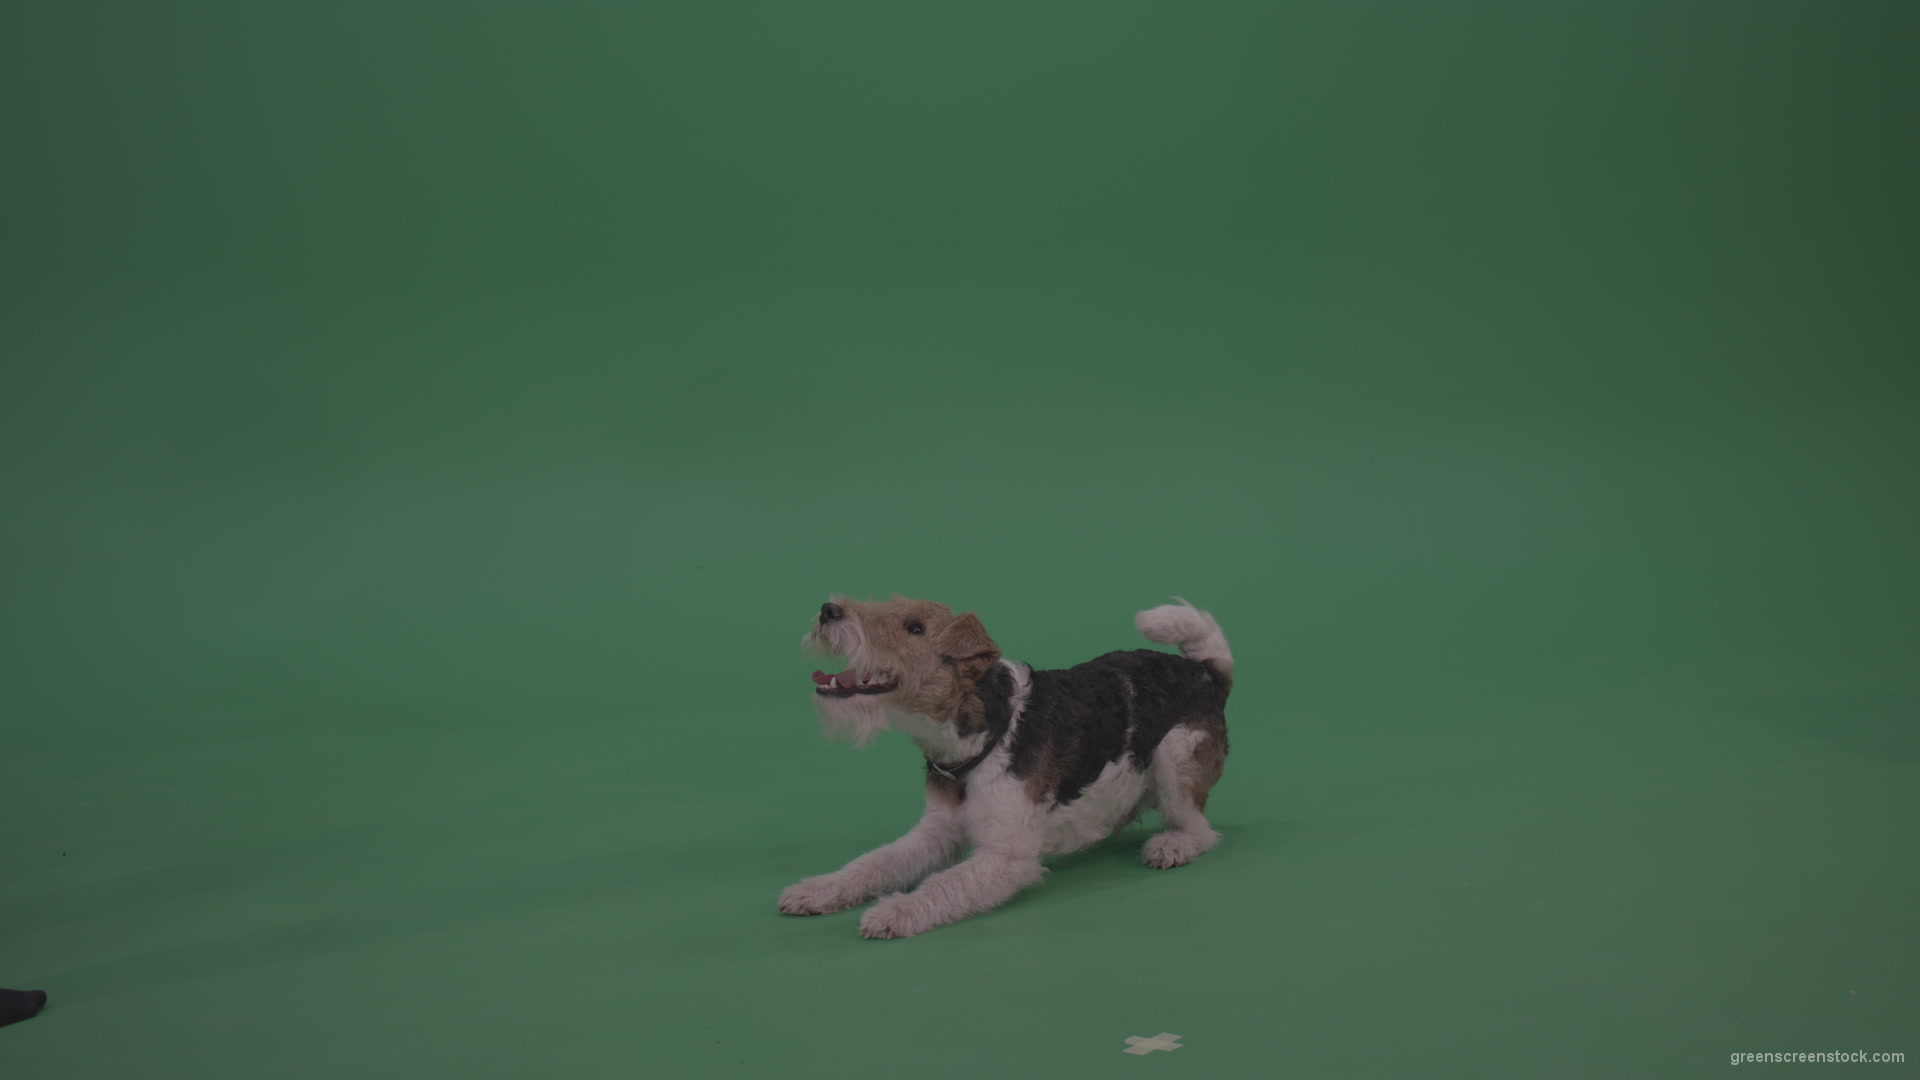 Wire-Fox-Terrier-Standing-On-Back-Feet-Ann-Serving-Then-Lies-Down-On-The-Ground-On-Green-Screen-Wall-Background_004 Green Screen Stock